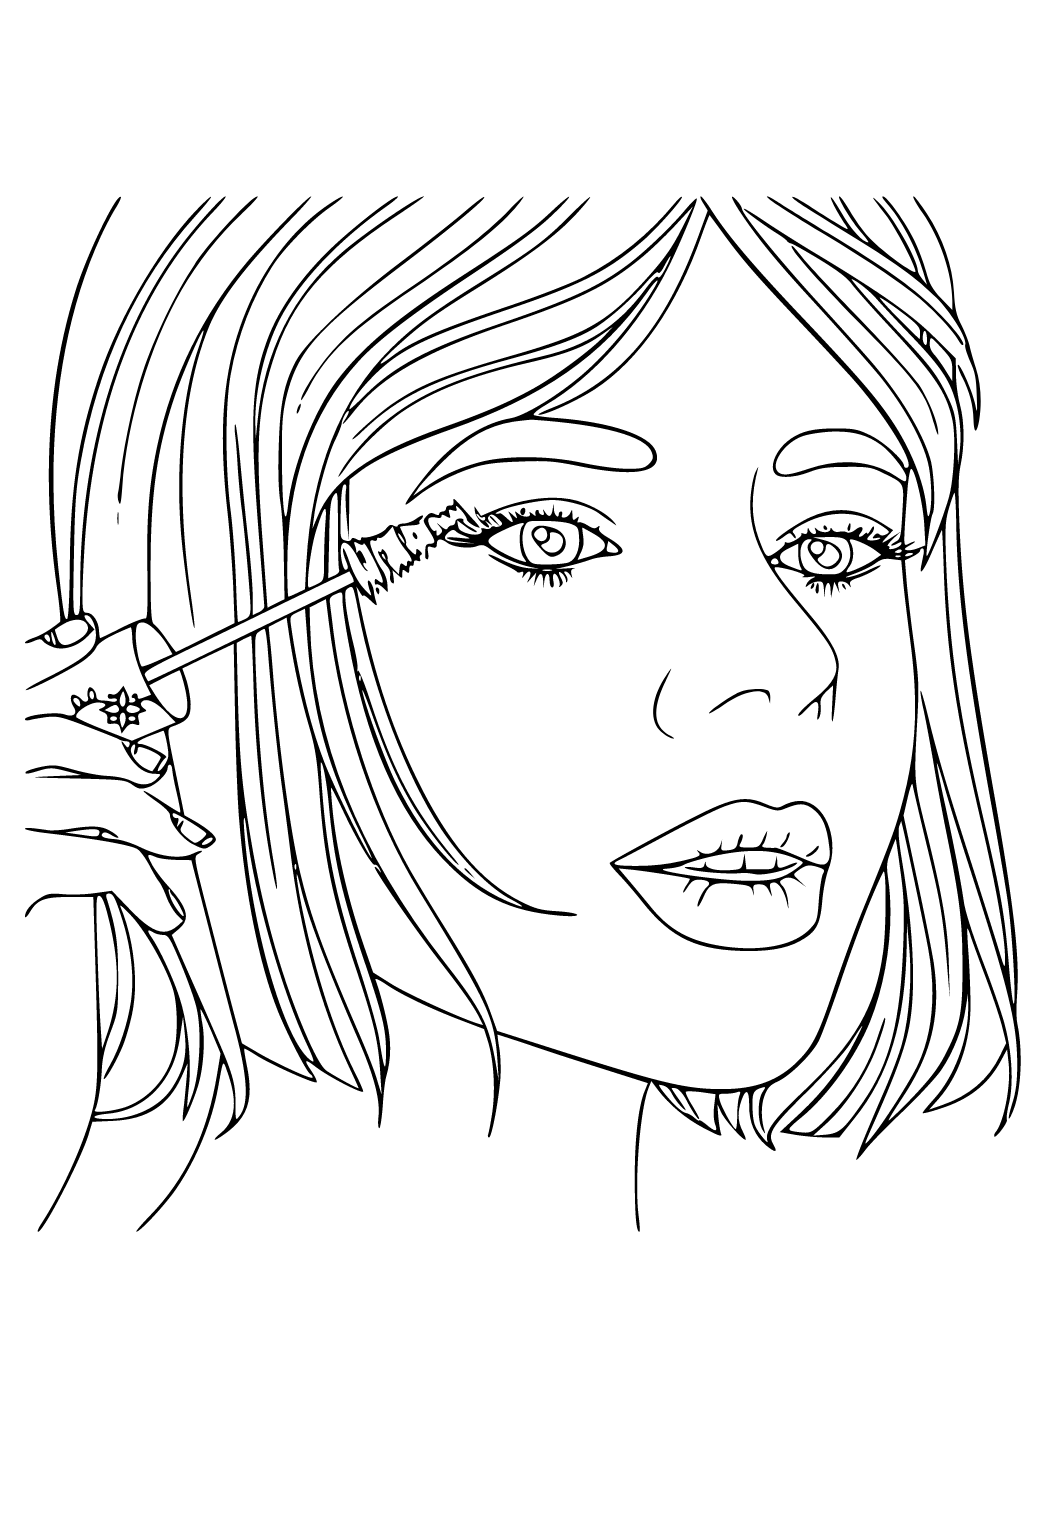 Free printable makeup eyelashes coloring page for adults and kids